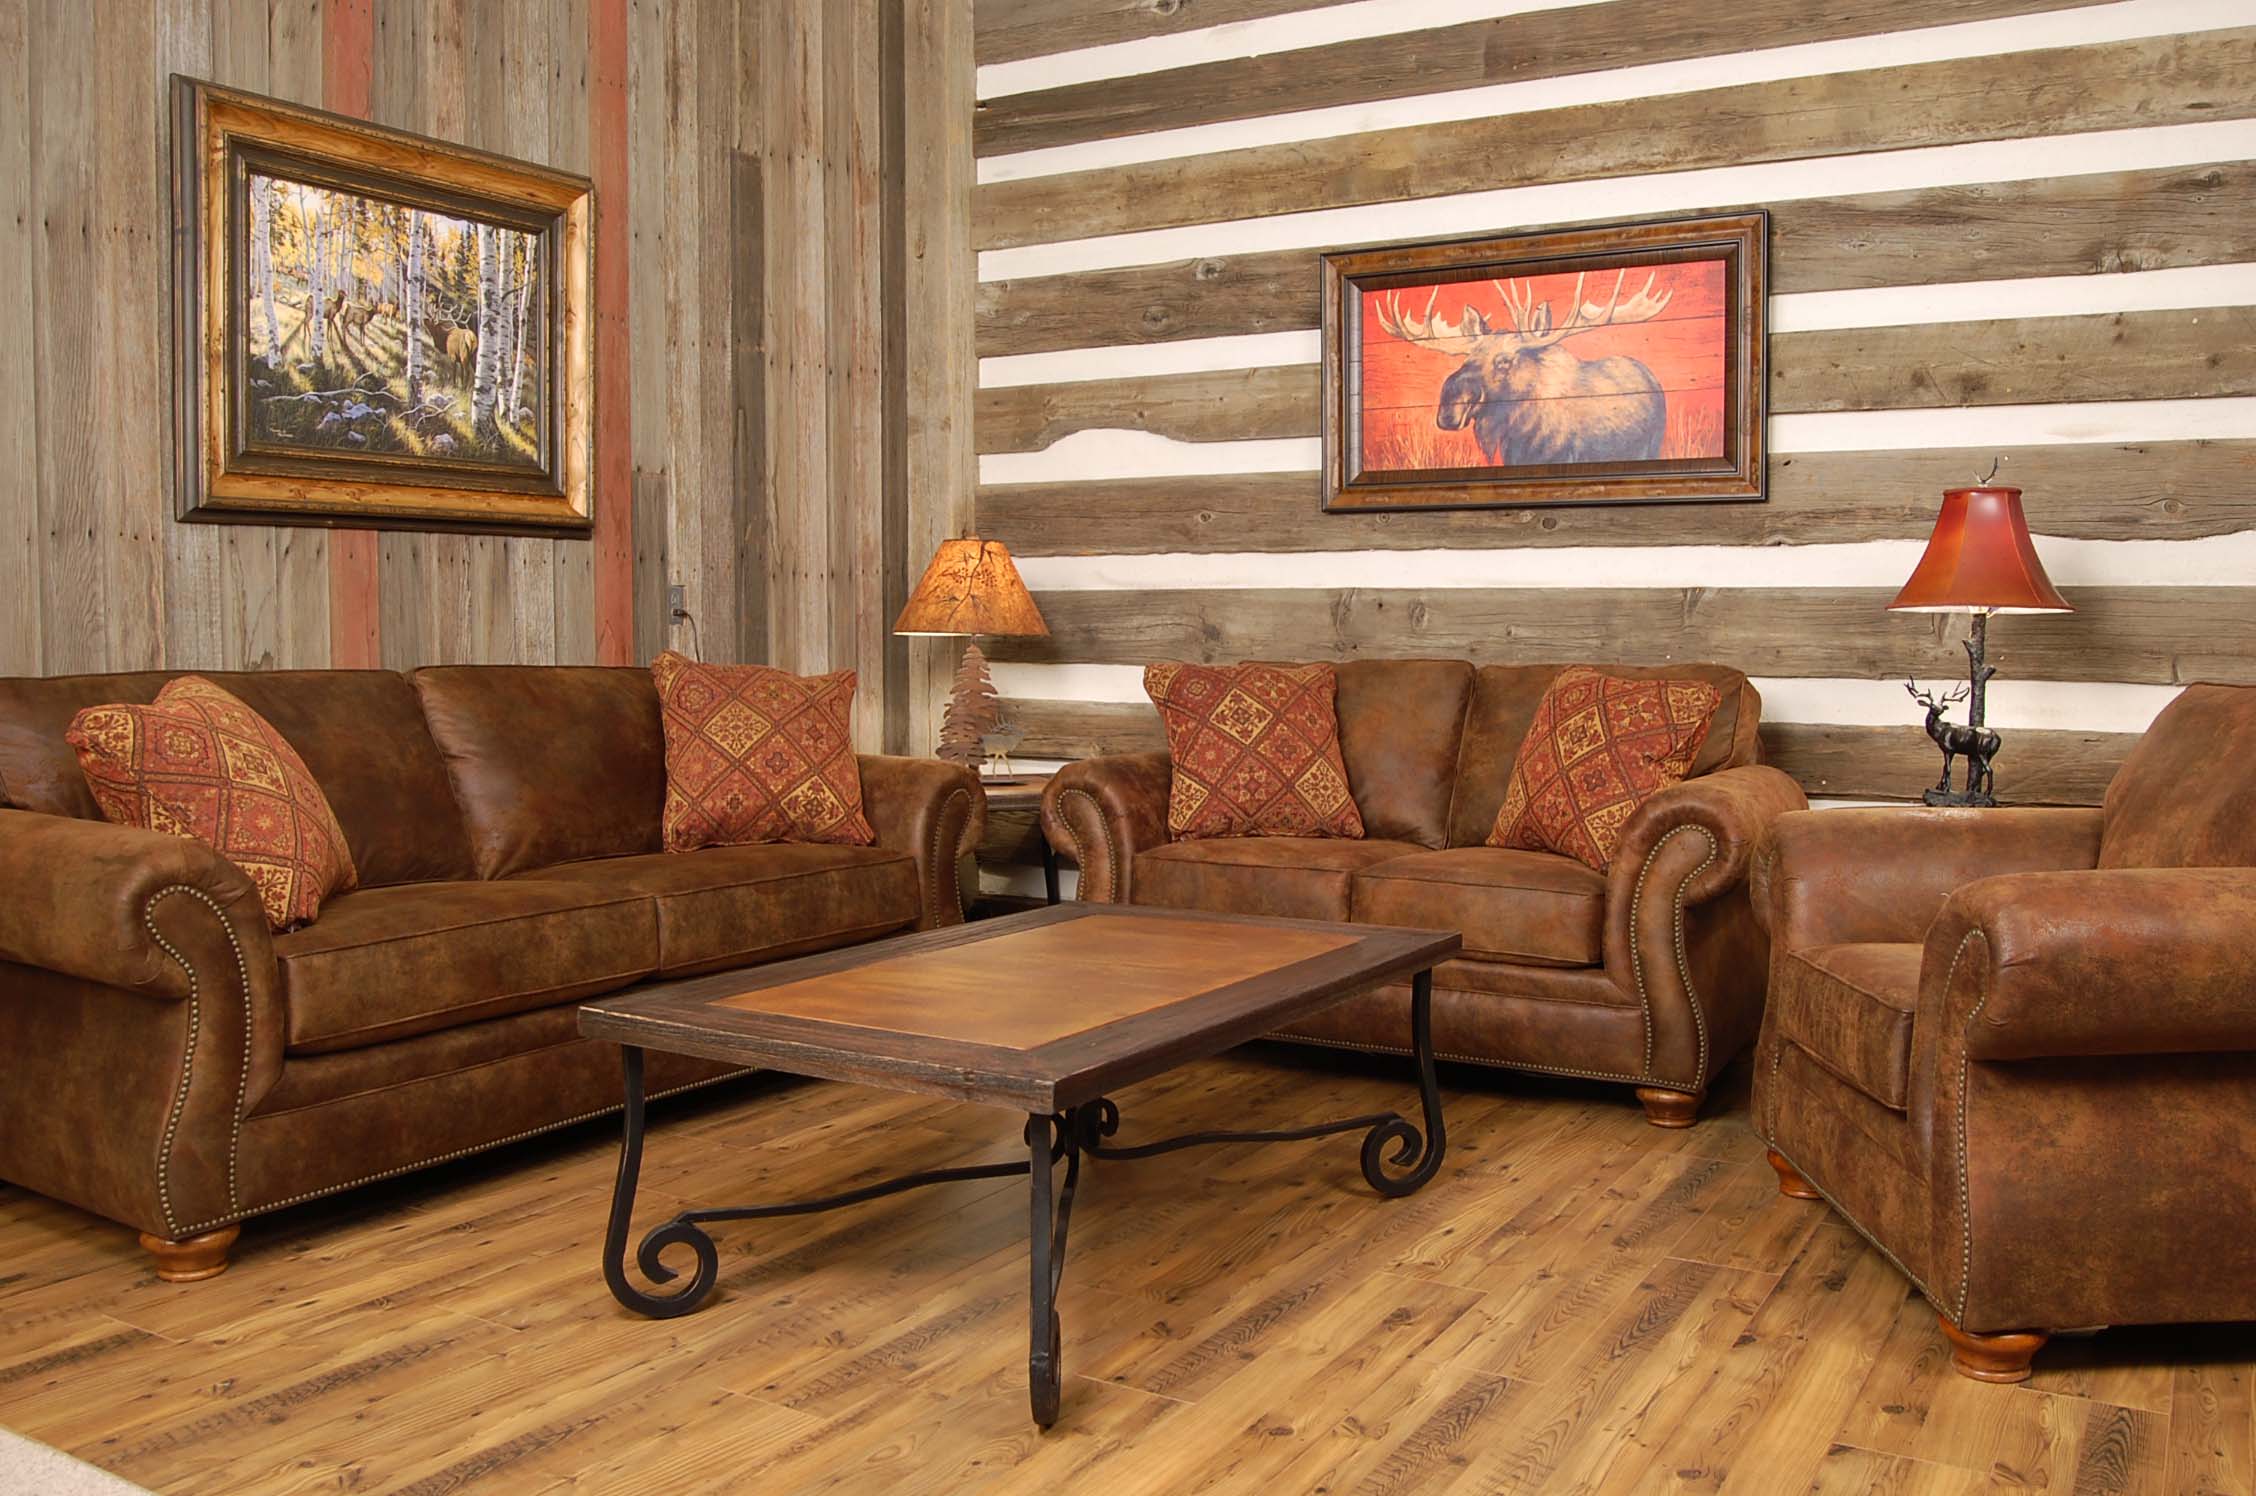 Interesting Facts I Bet You Never Knew About Texas Home Decor